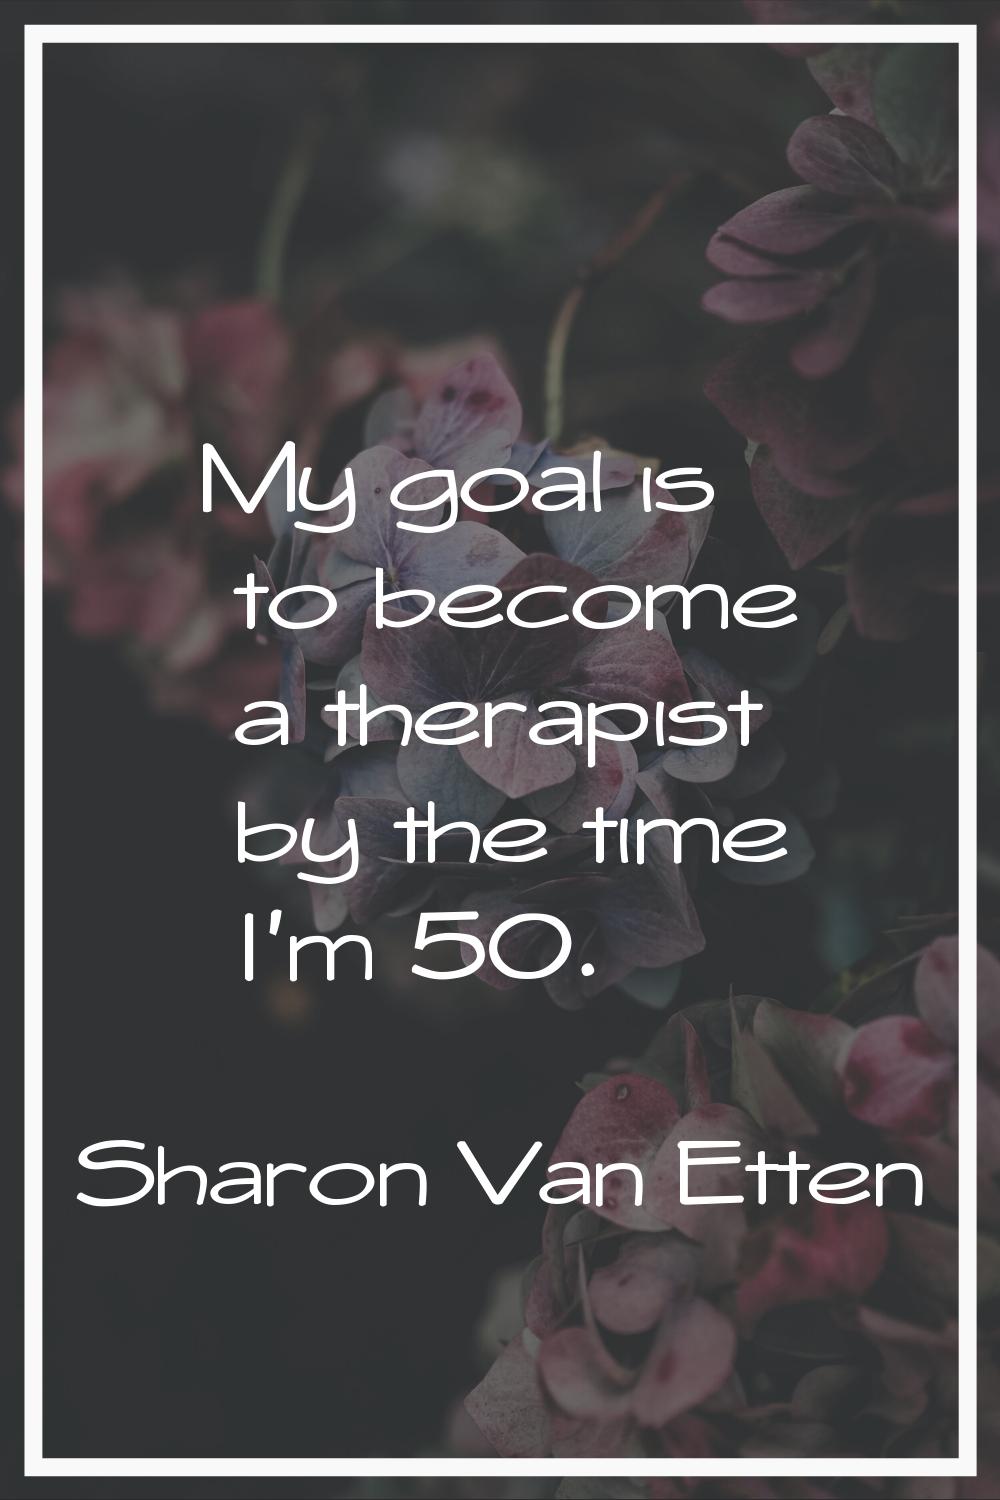 My goal is to become a therapist by the time I'm 50.